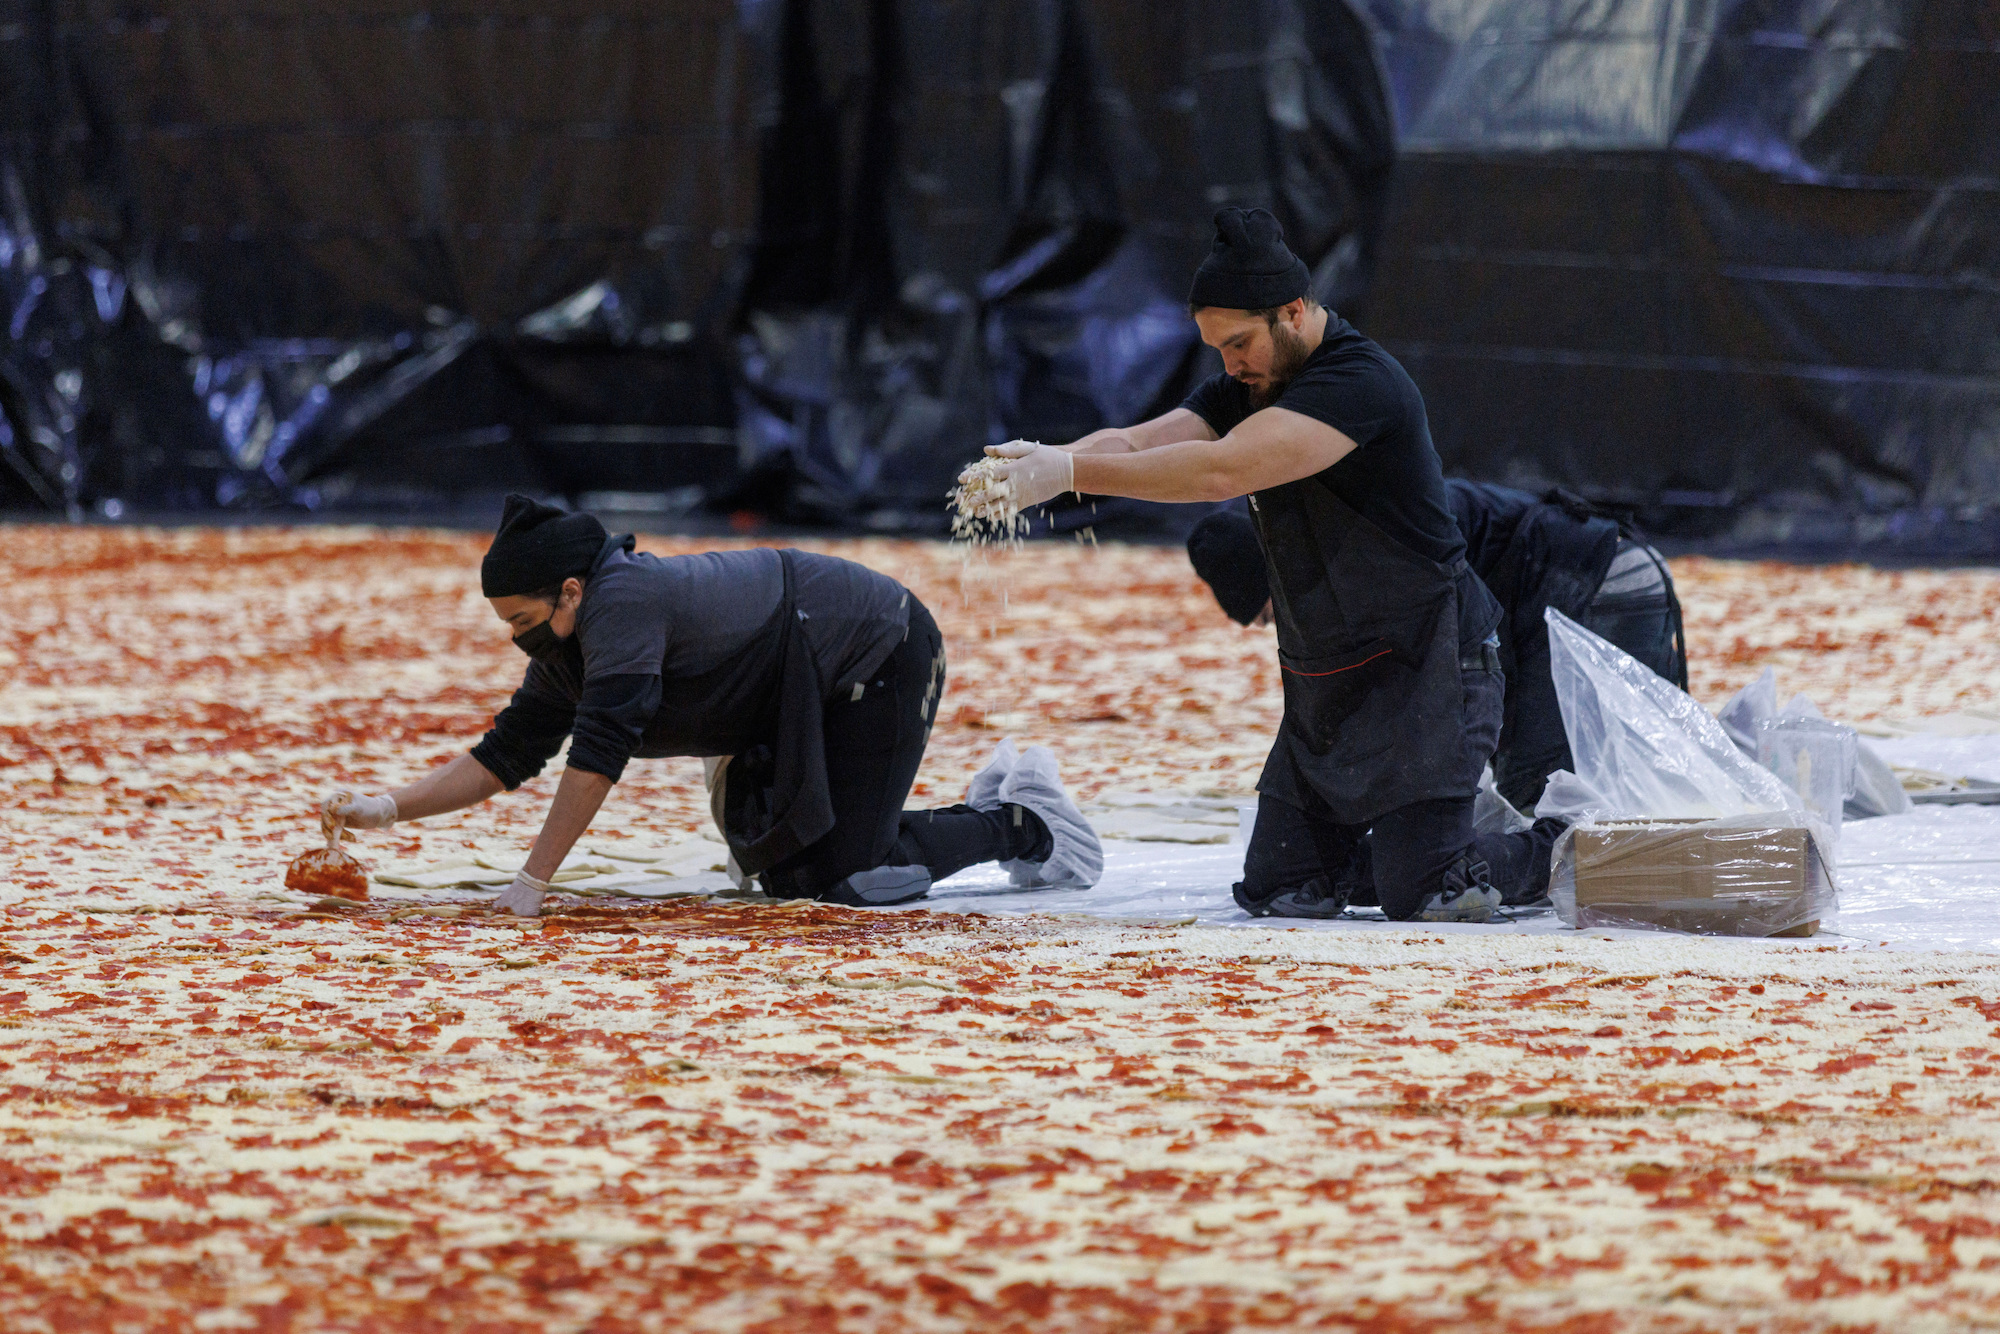 New record set for world's biggest pizza